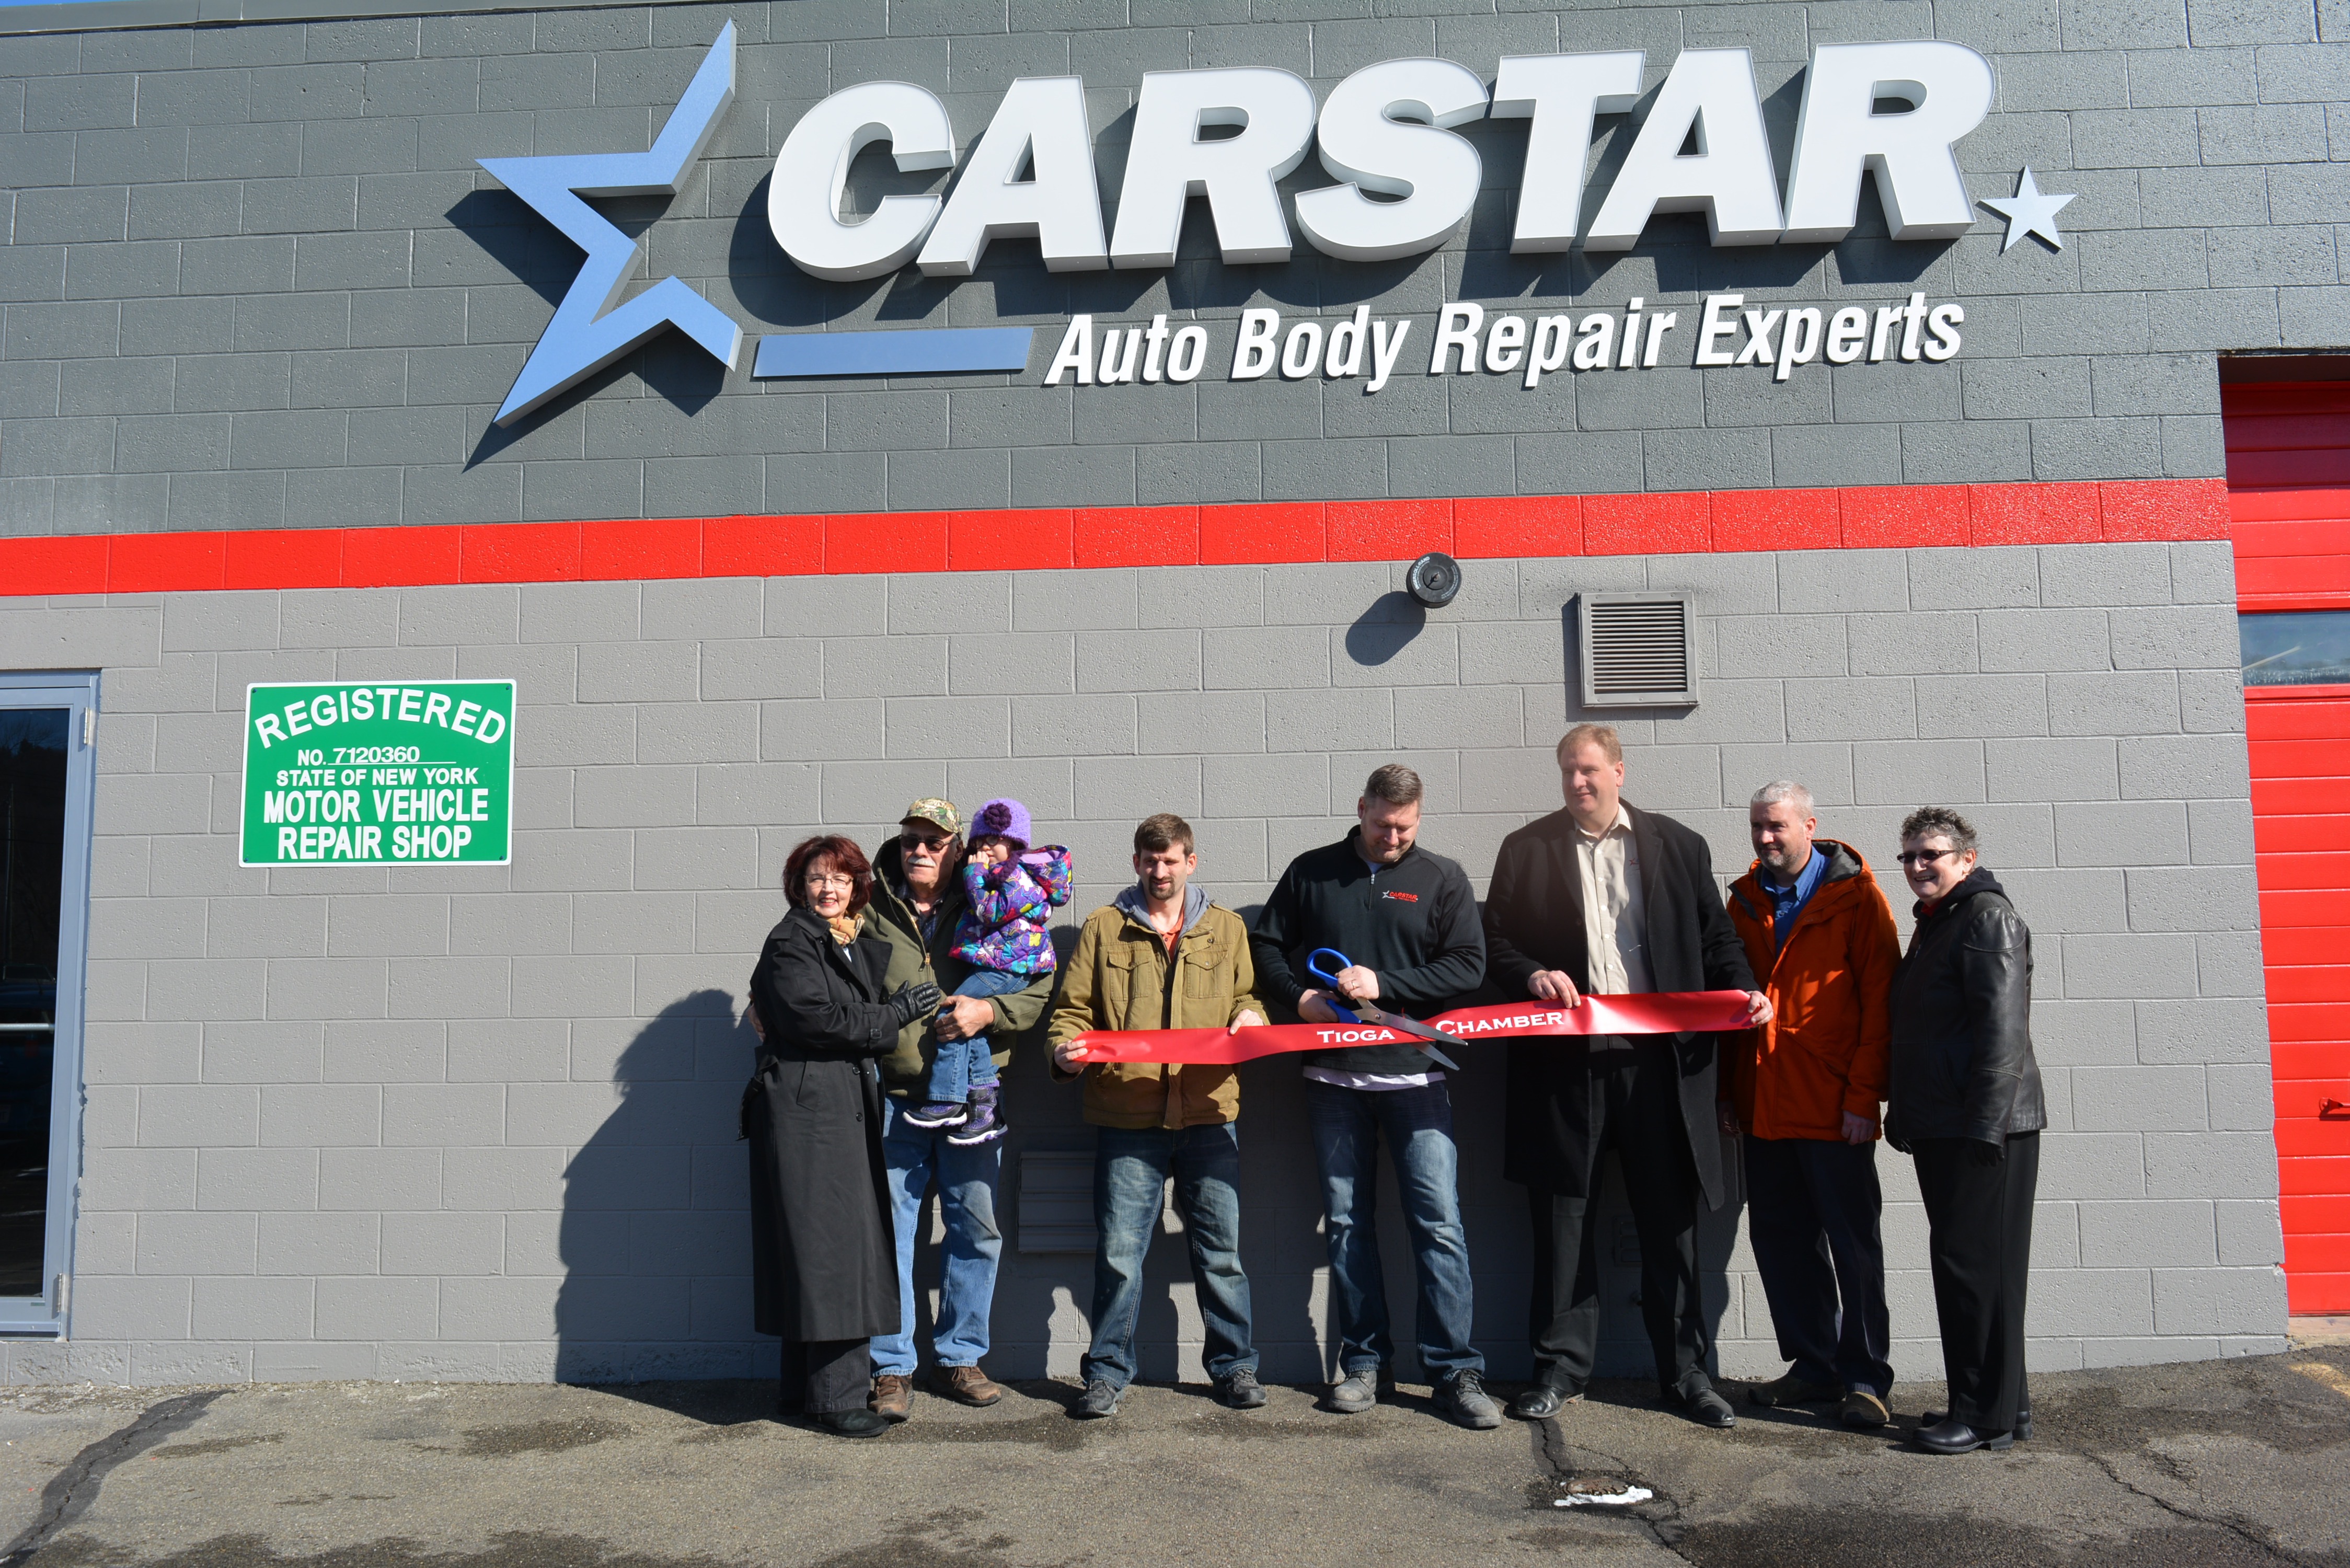 Tioga Chamber welcomes Carstar with ribbon cutting event